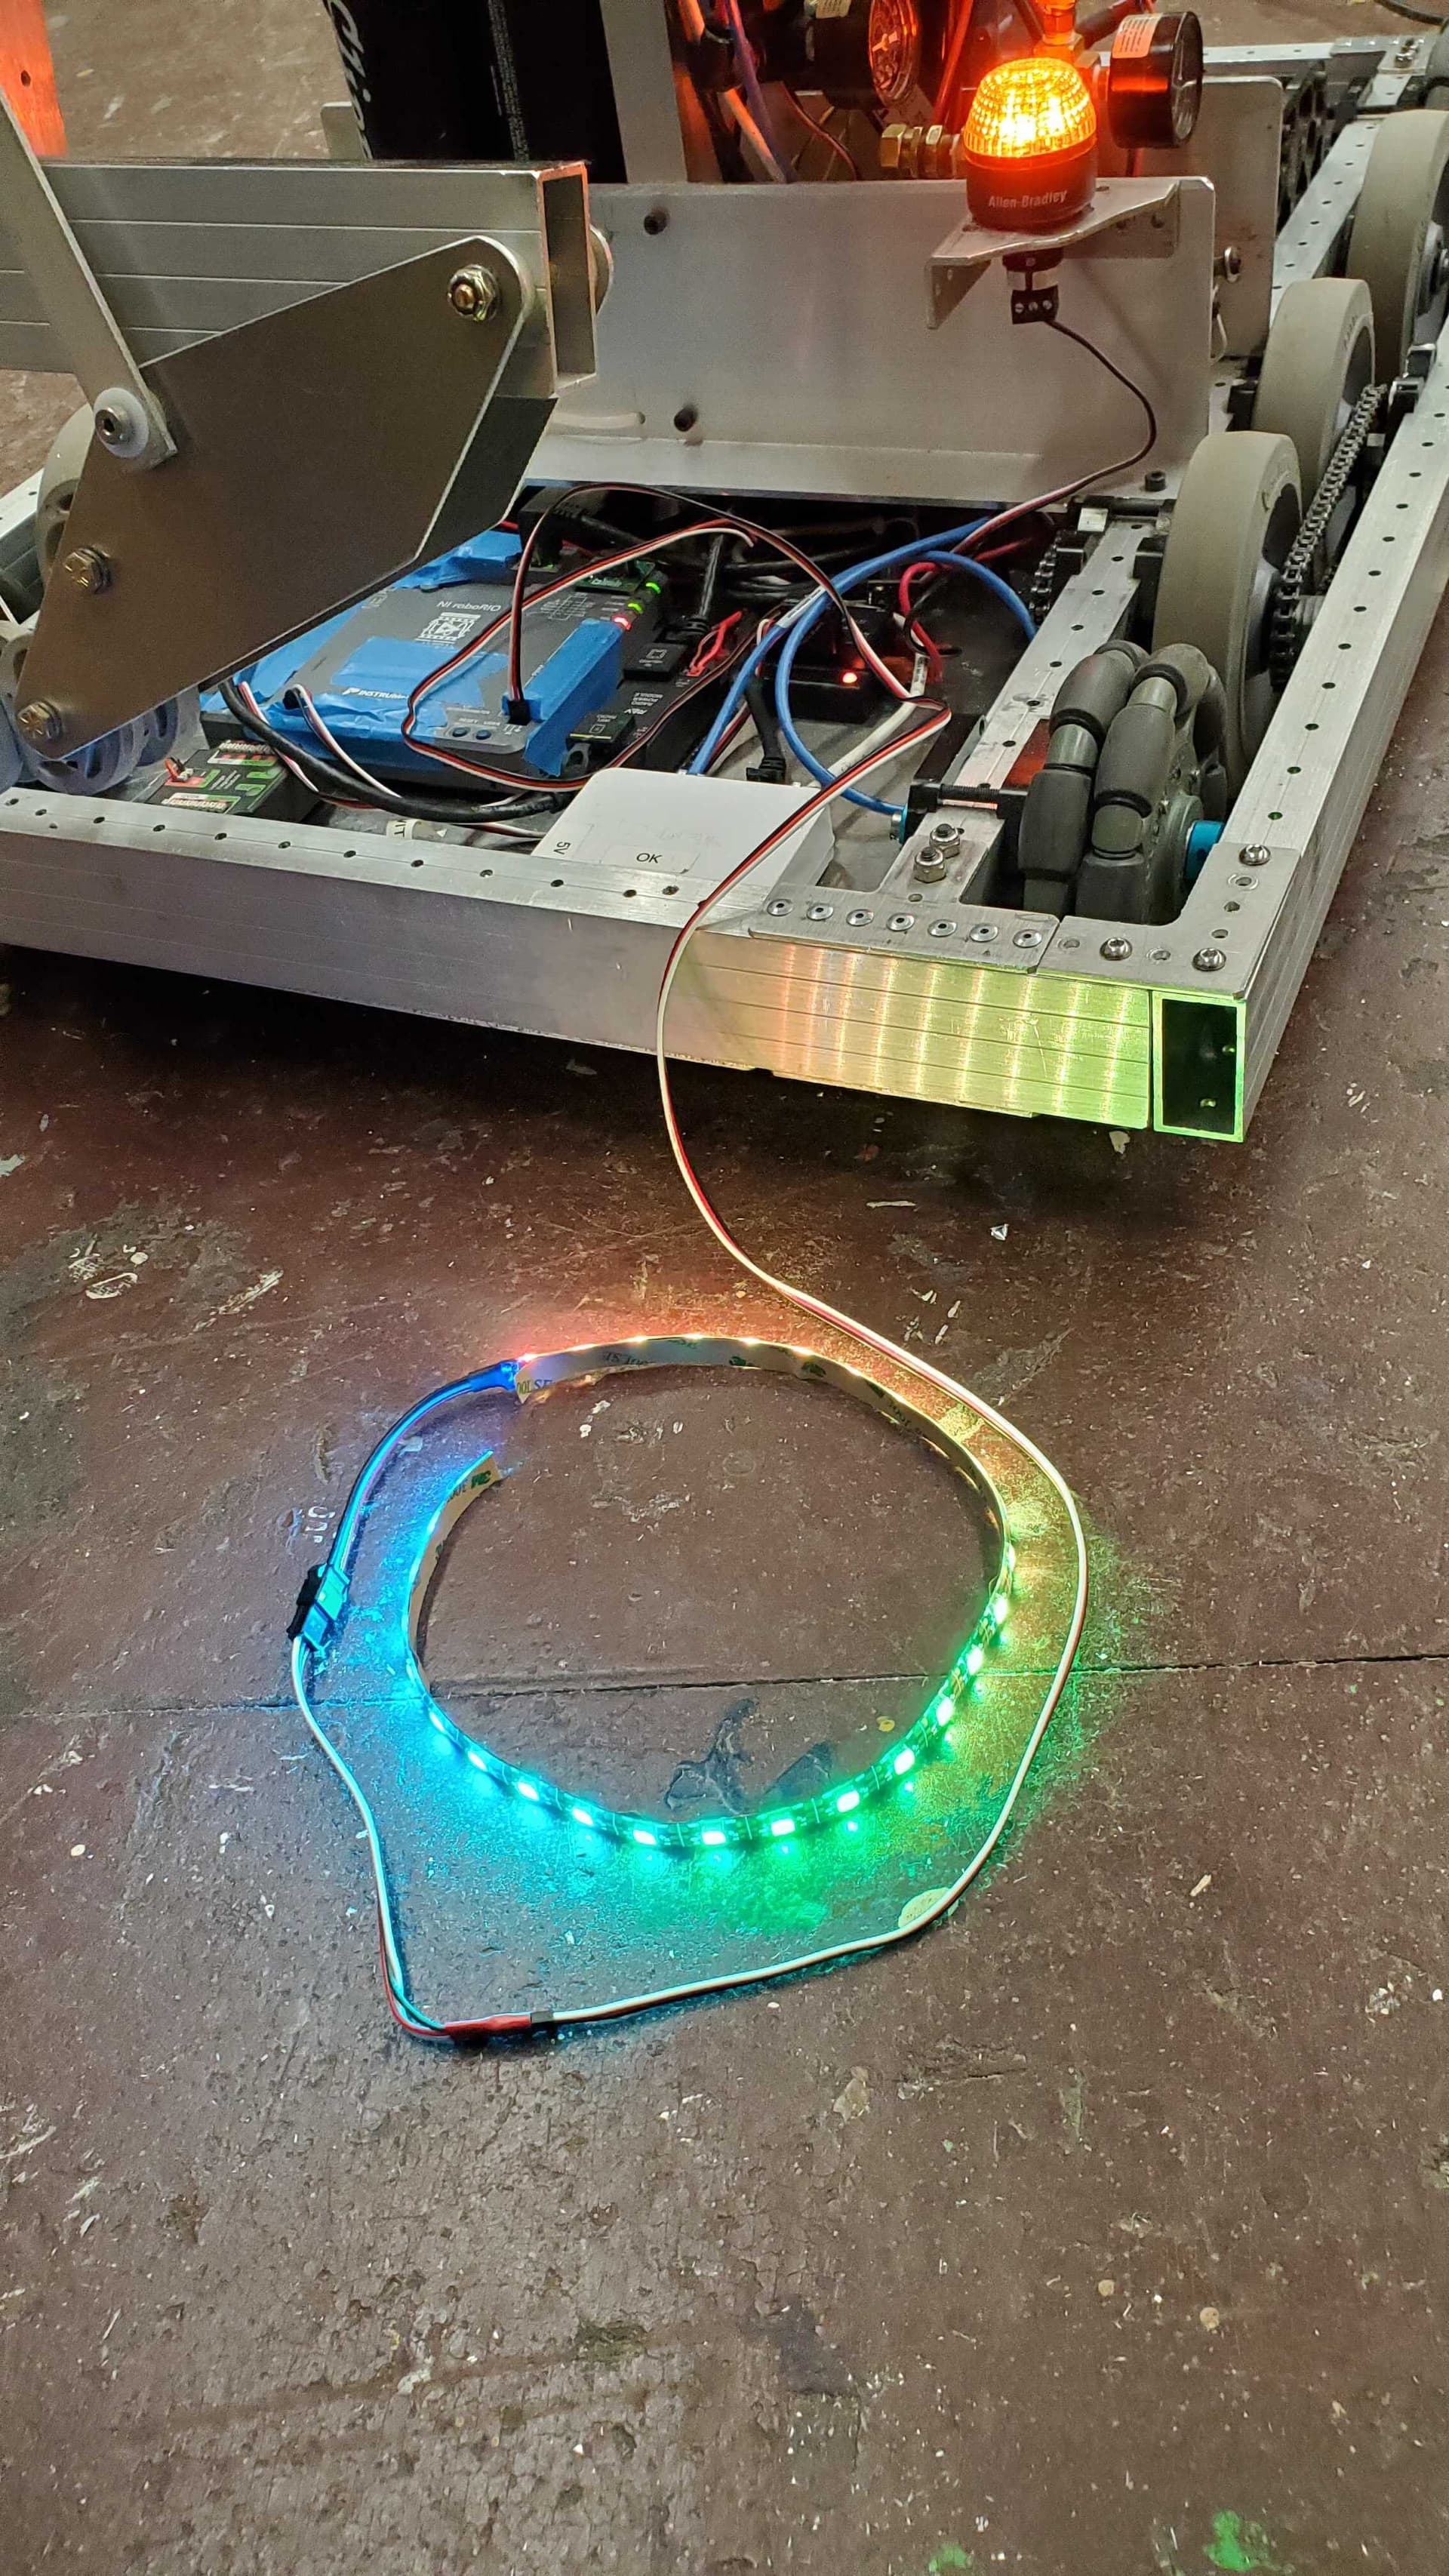 Is it possible to plug led strips into the roborio? - #40 by KaV1a